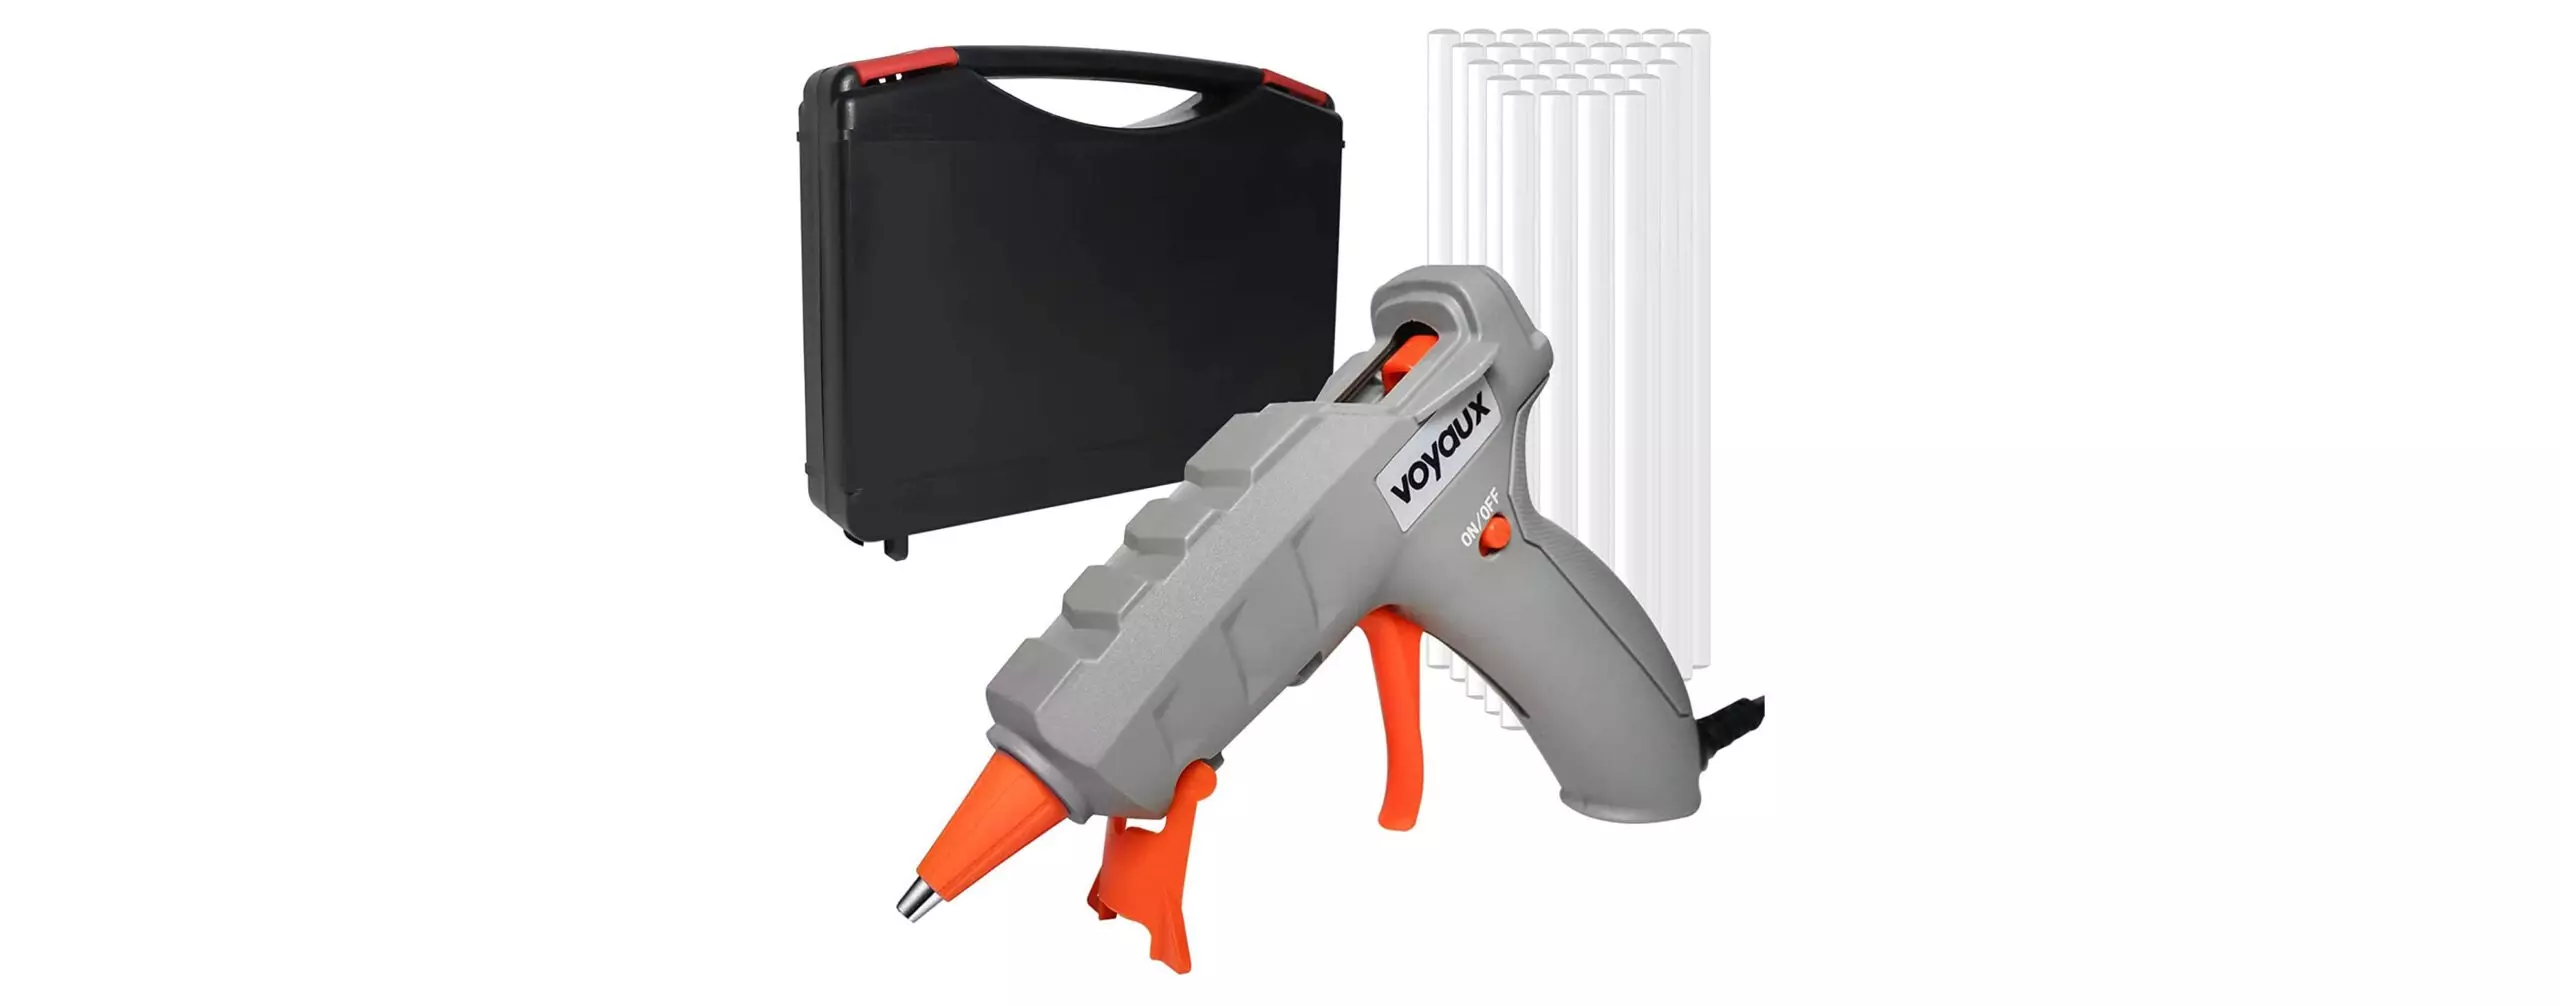 The Best Glue Guns (Review and Buying Guide) in 2022